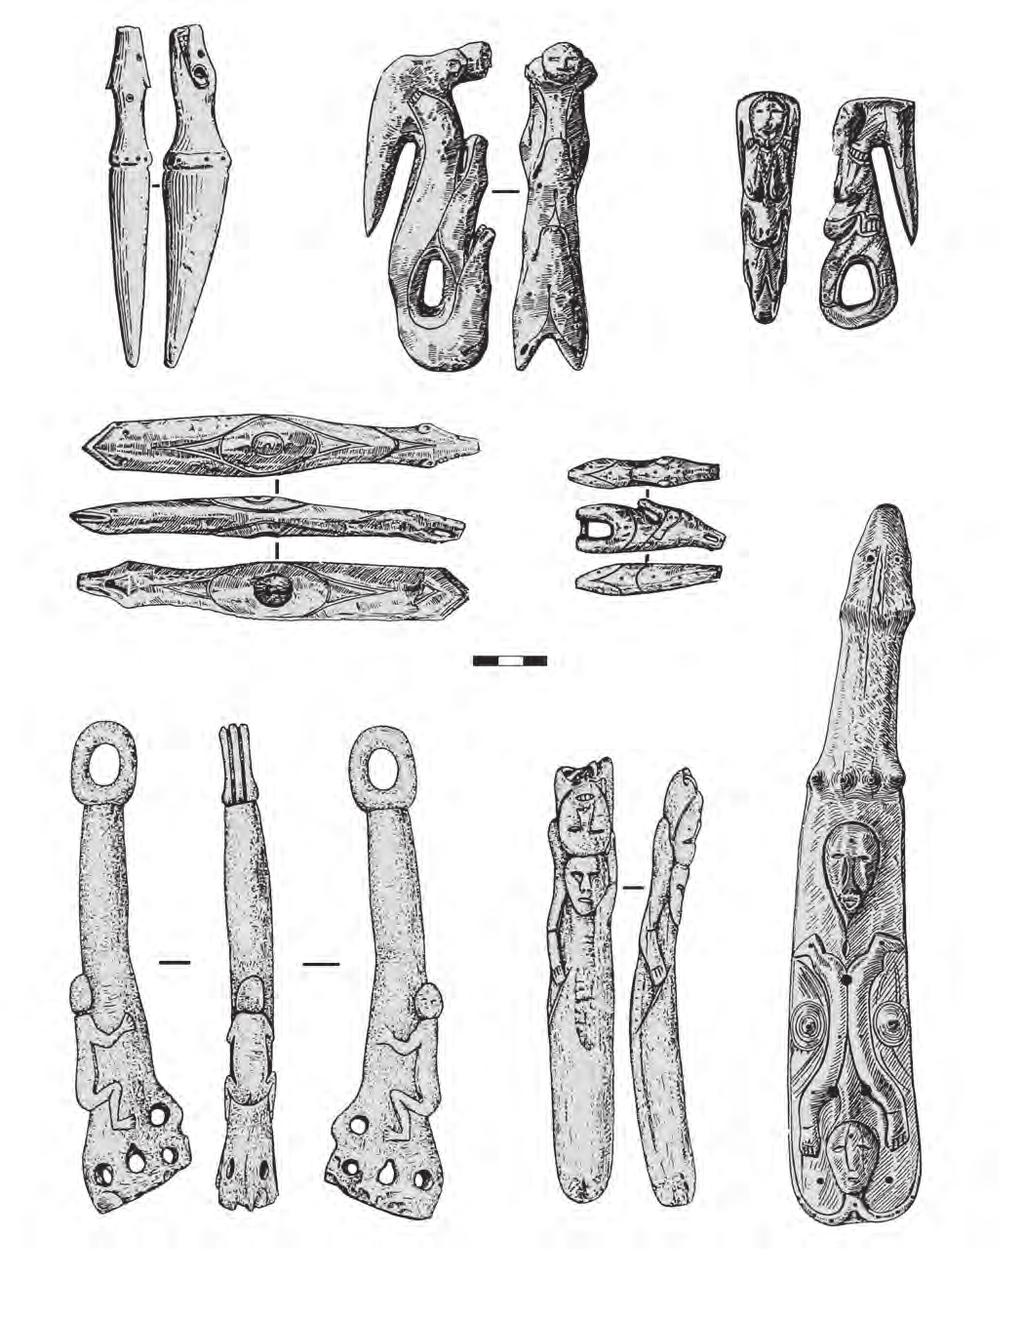 7 4 8 6 5 0 3 centimeters 1 2 3 Figure 3. Artifacts with anthropomorphic and zoomorphic images. 2. Ekven Spit, surface material; 1, 3-8. Ekven cemetery (1. Burial 319; 3.